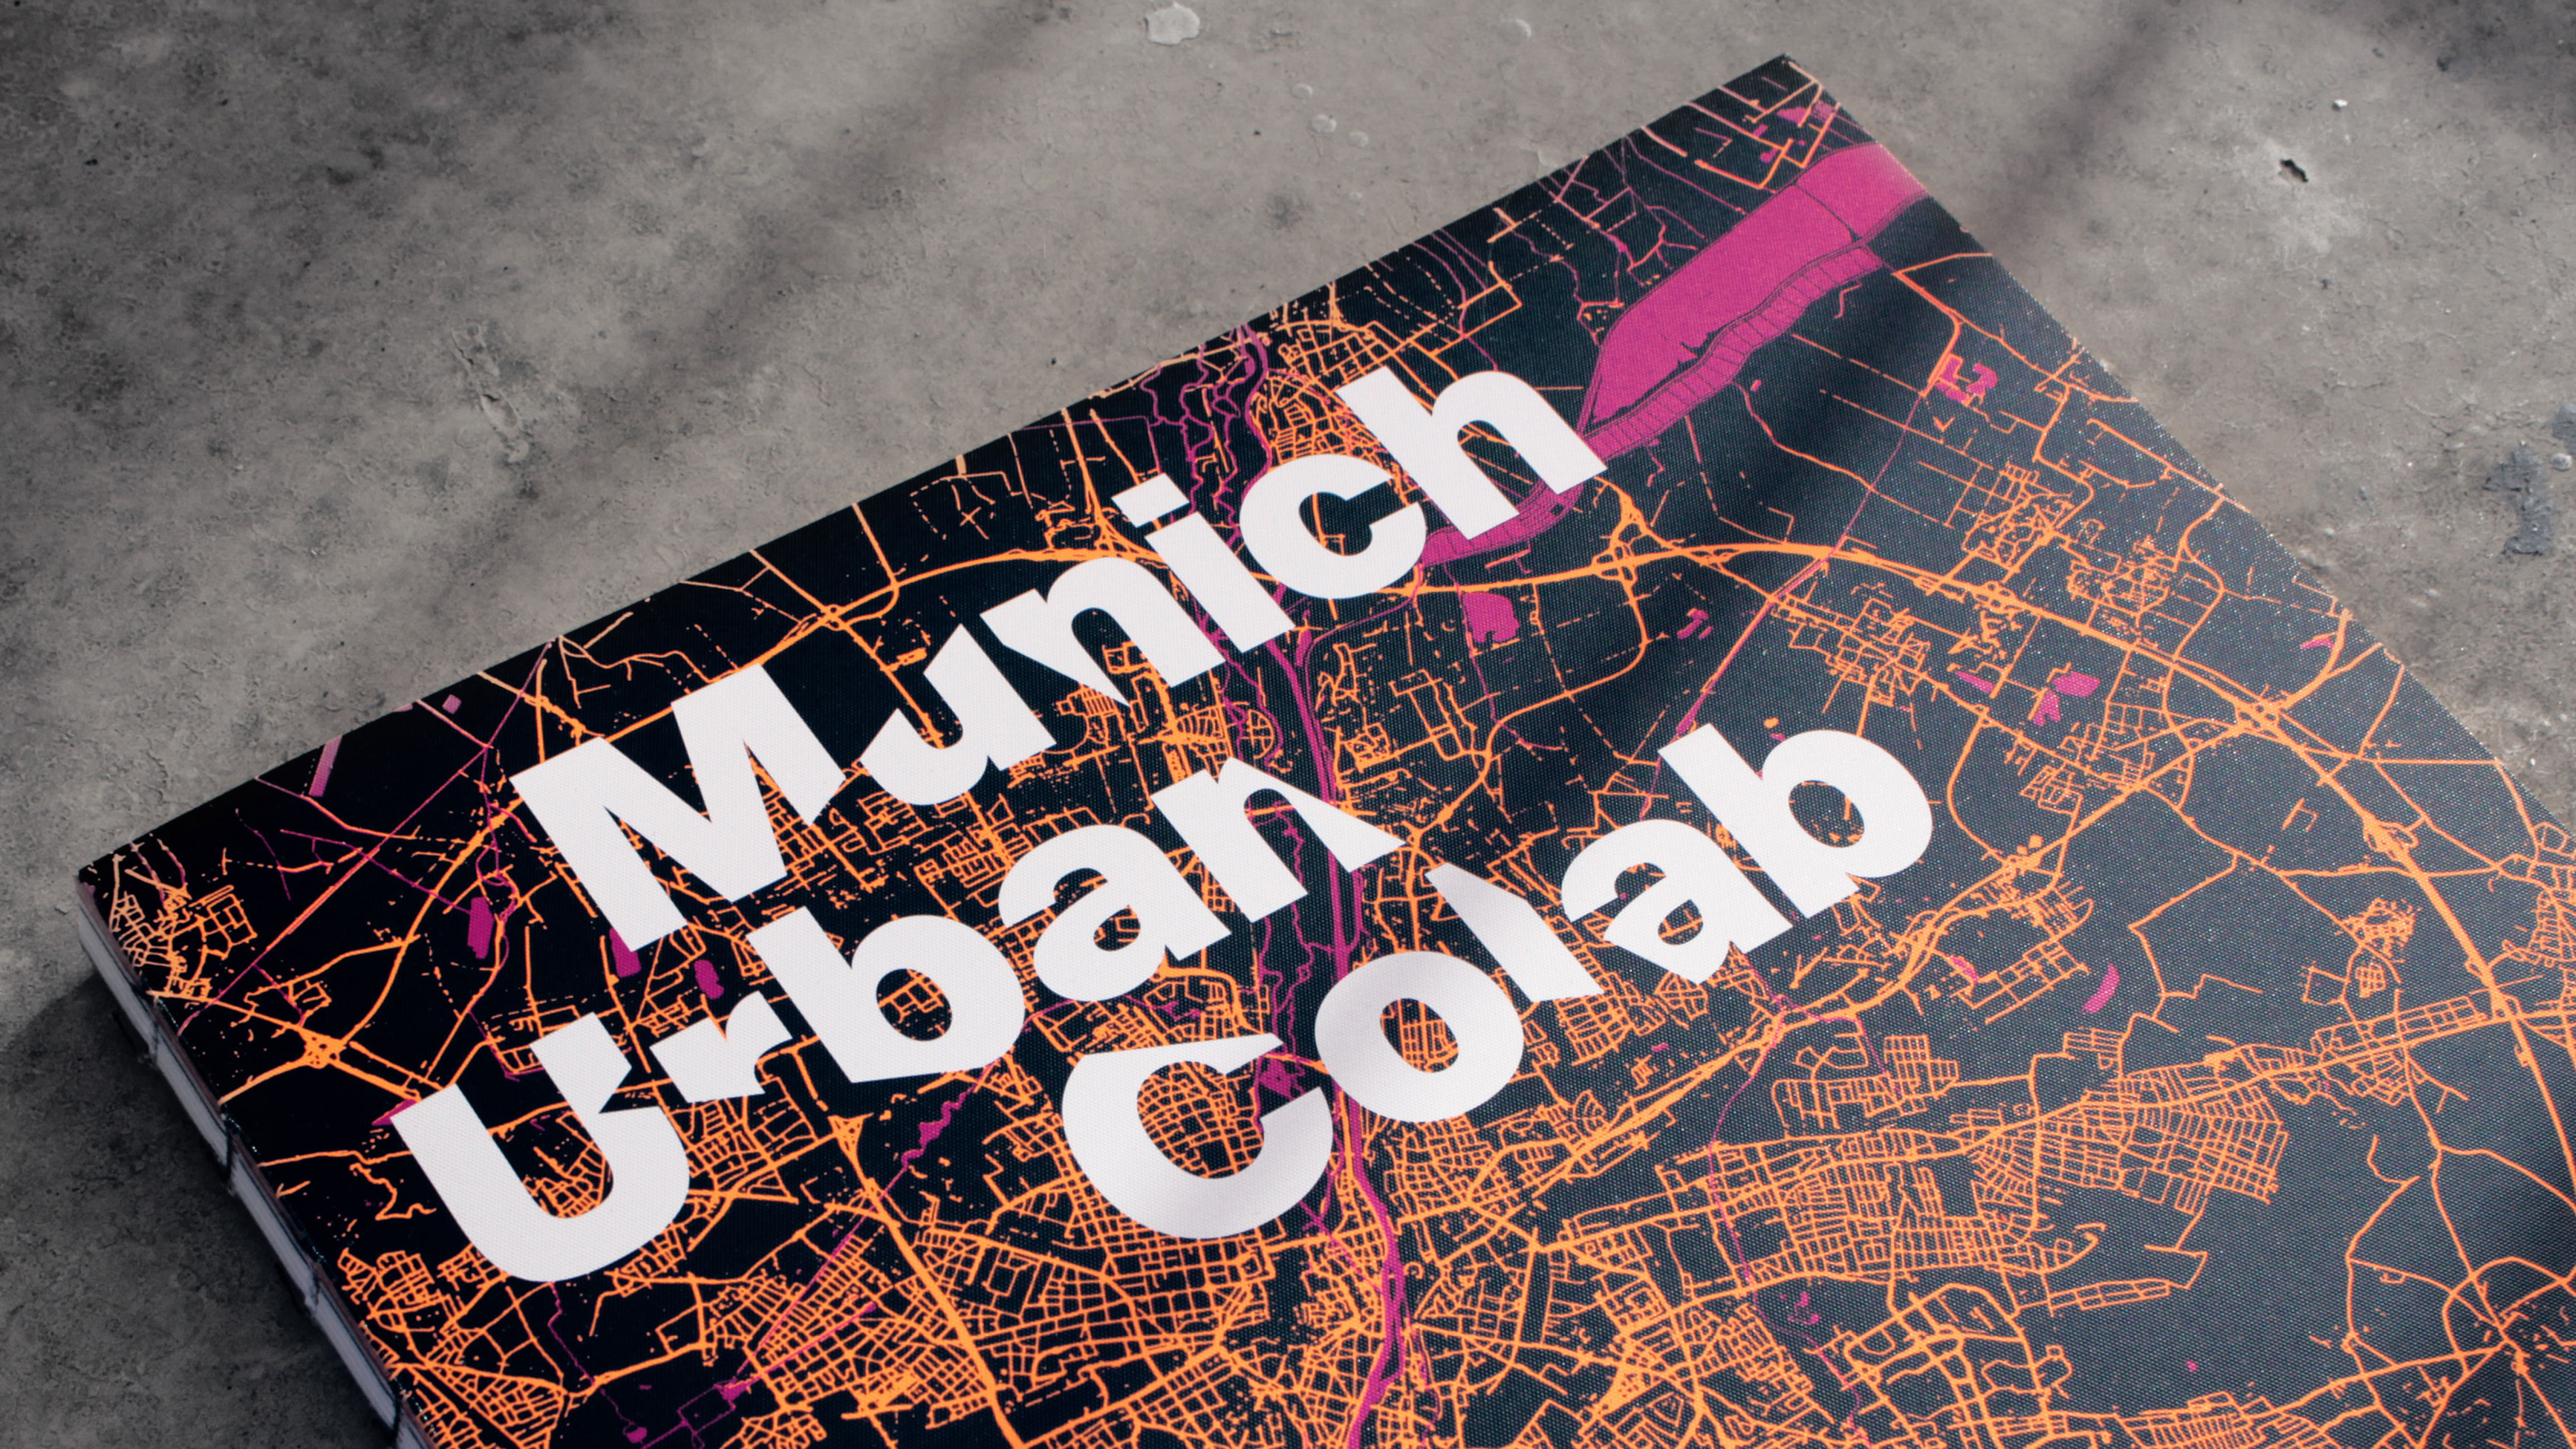 Munich Urban Colab – Space for the Unimagined